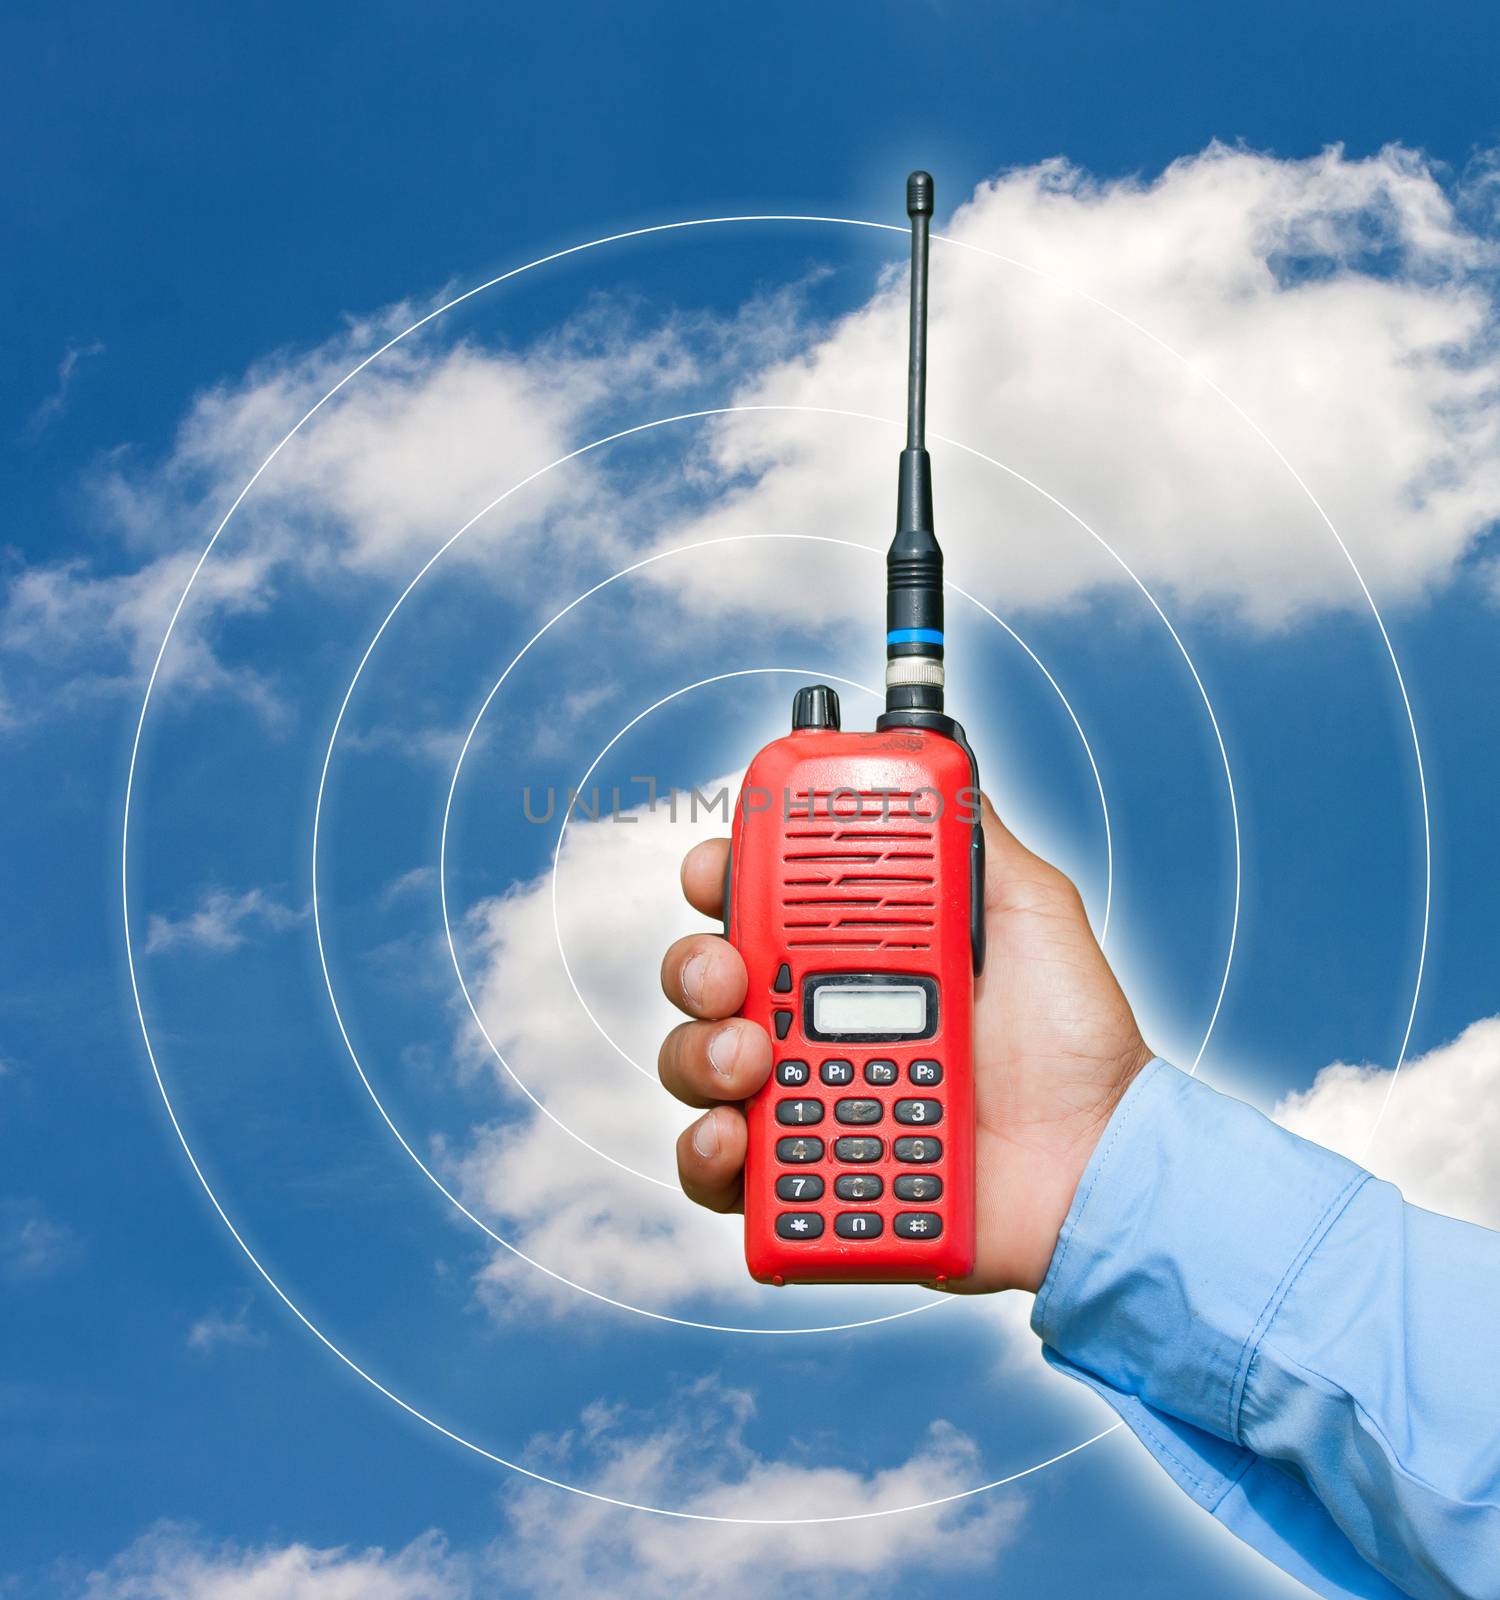 Red portable radio transceiver in hand on blue sky